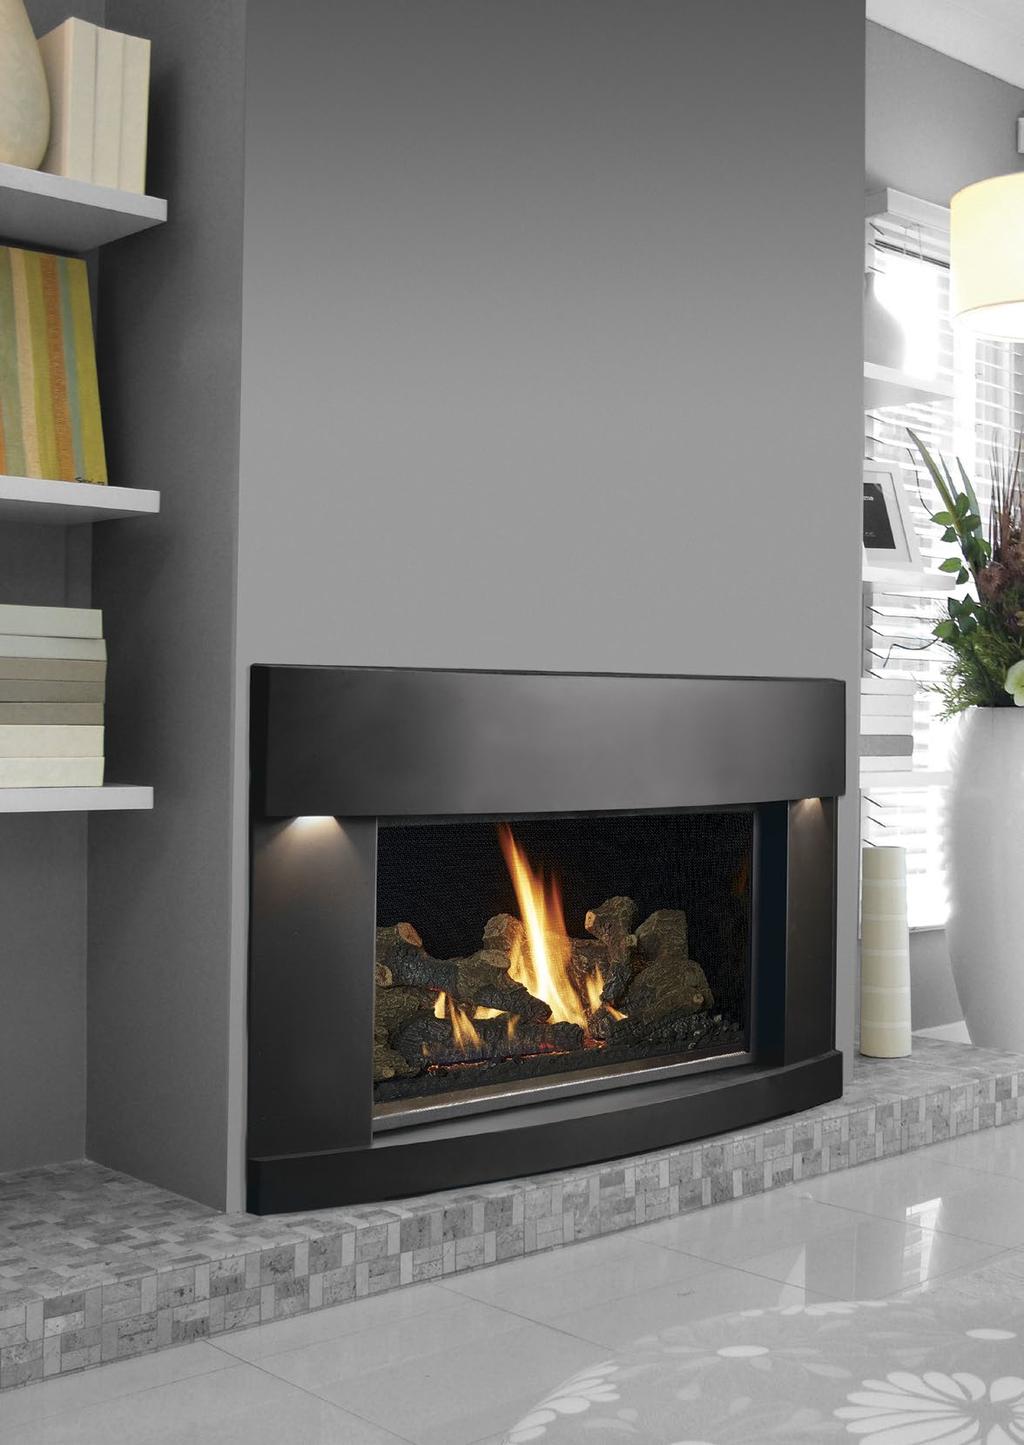 DVL GS2 Direct Vent Gas Fireplace Insert The Lopi DVL GS2 GreenSmart Direct Vent Large insert will turn your inefficient fireplace into a convenient source of gas heat.